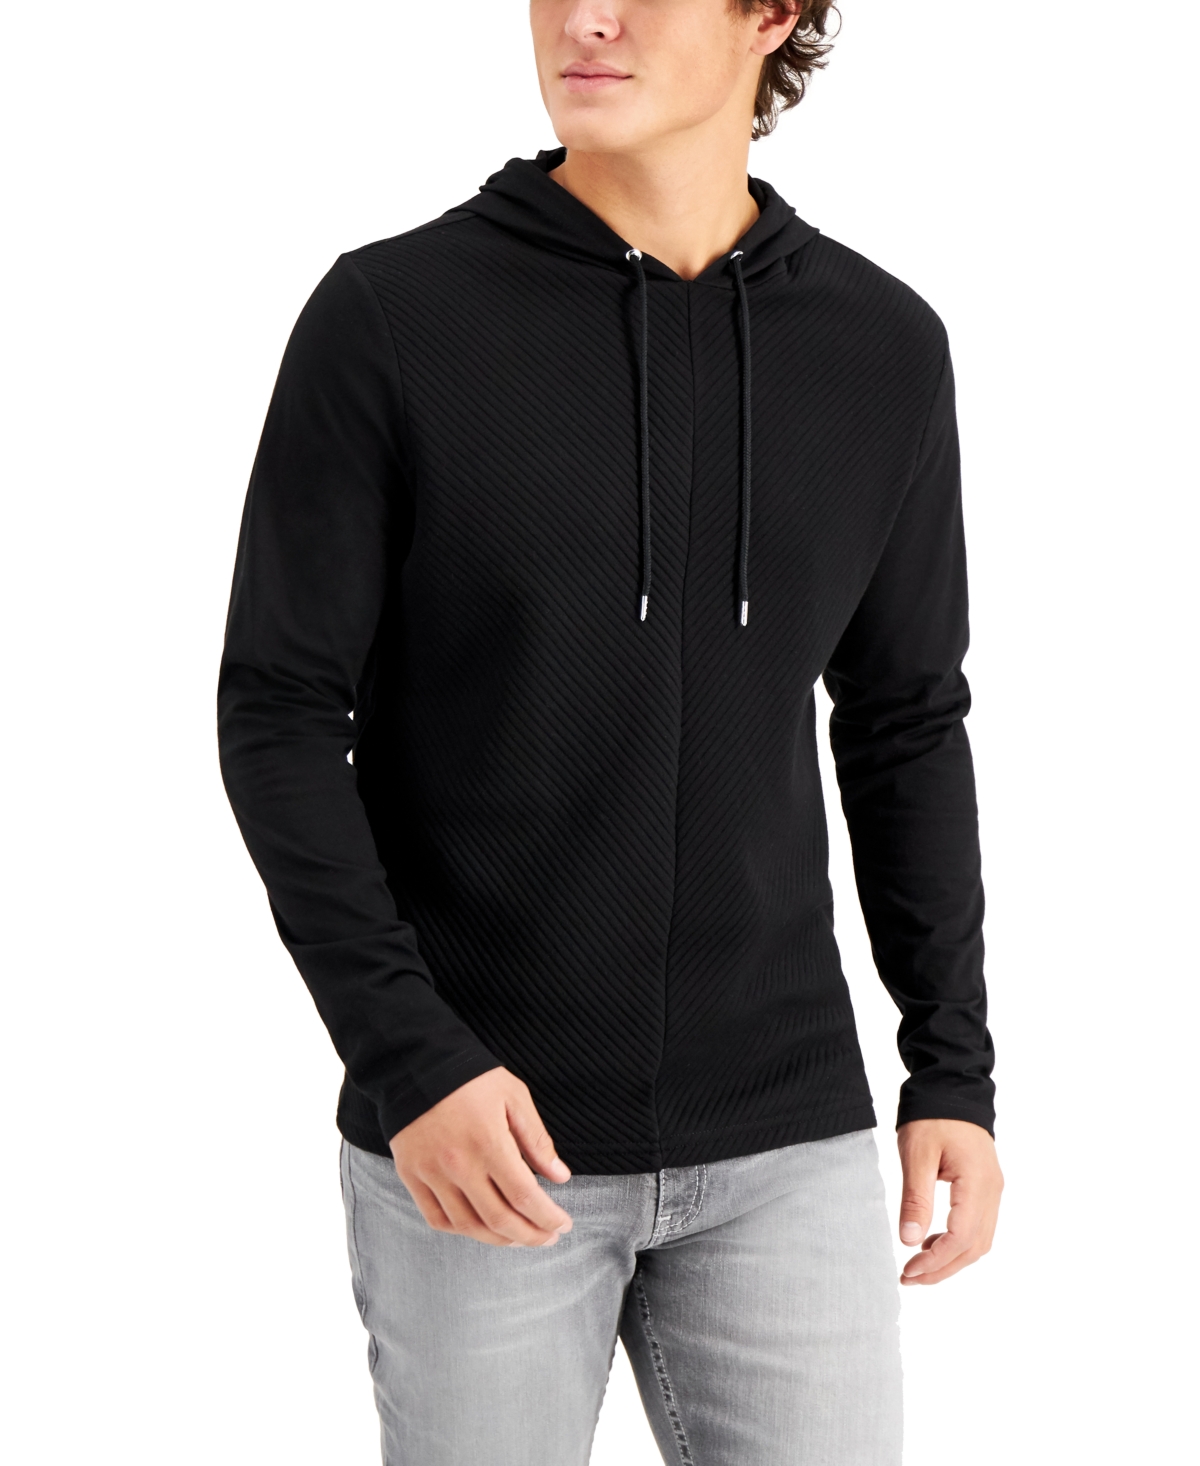 Men's Changed Hoodie, Created for Macy's - Black